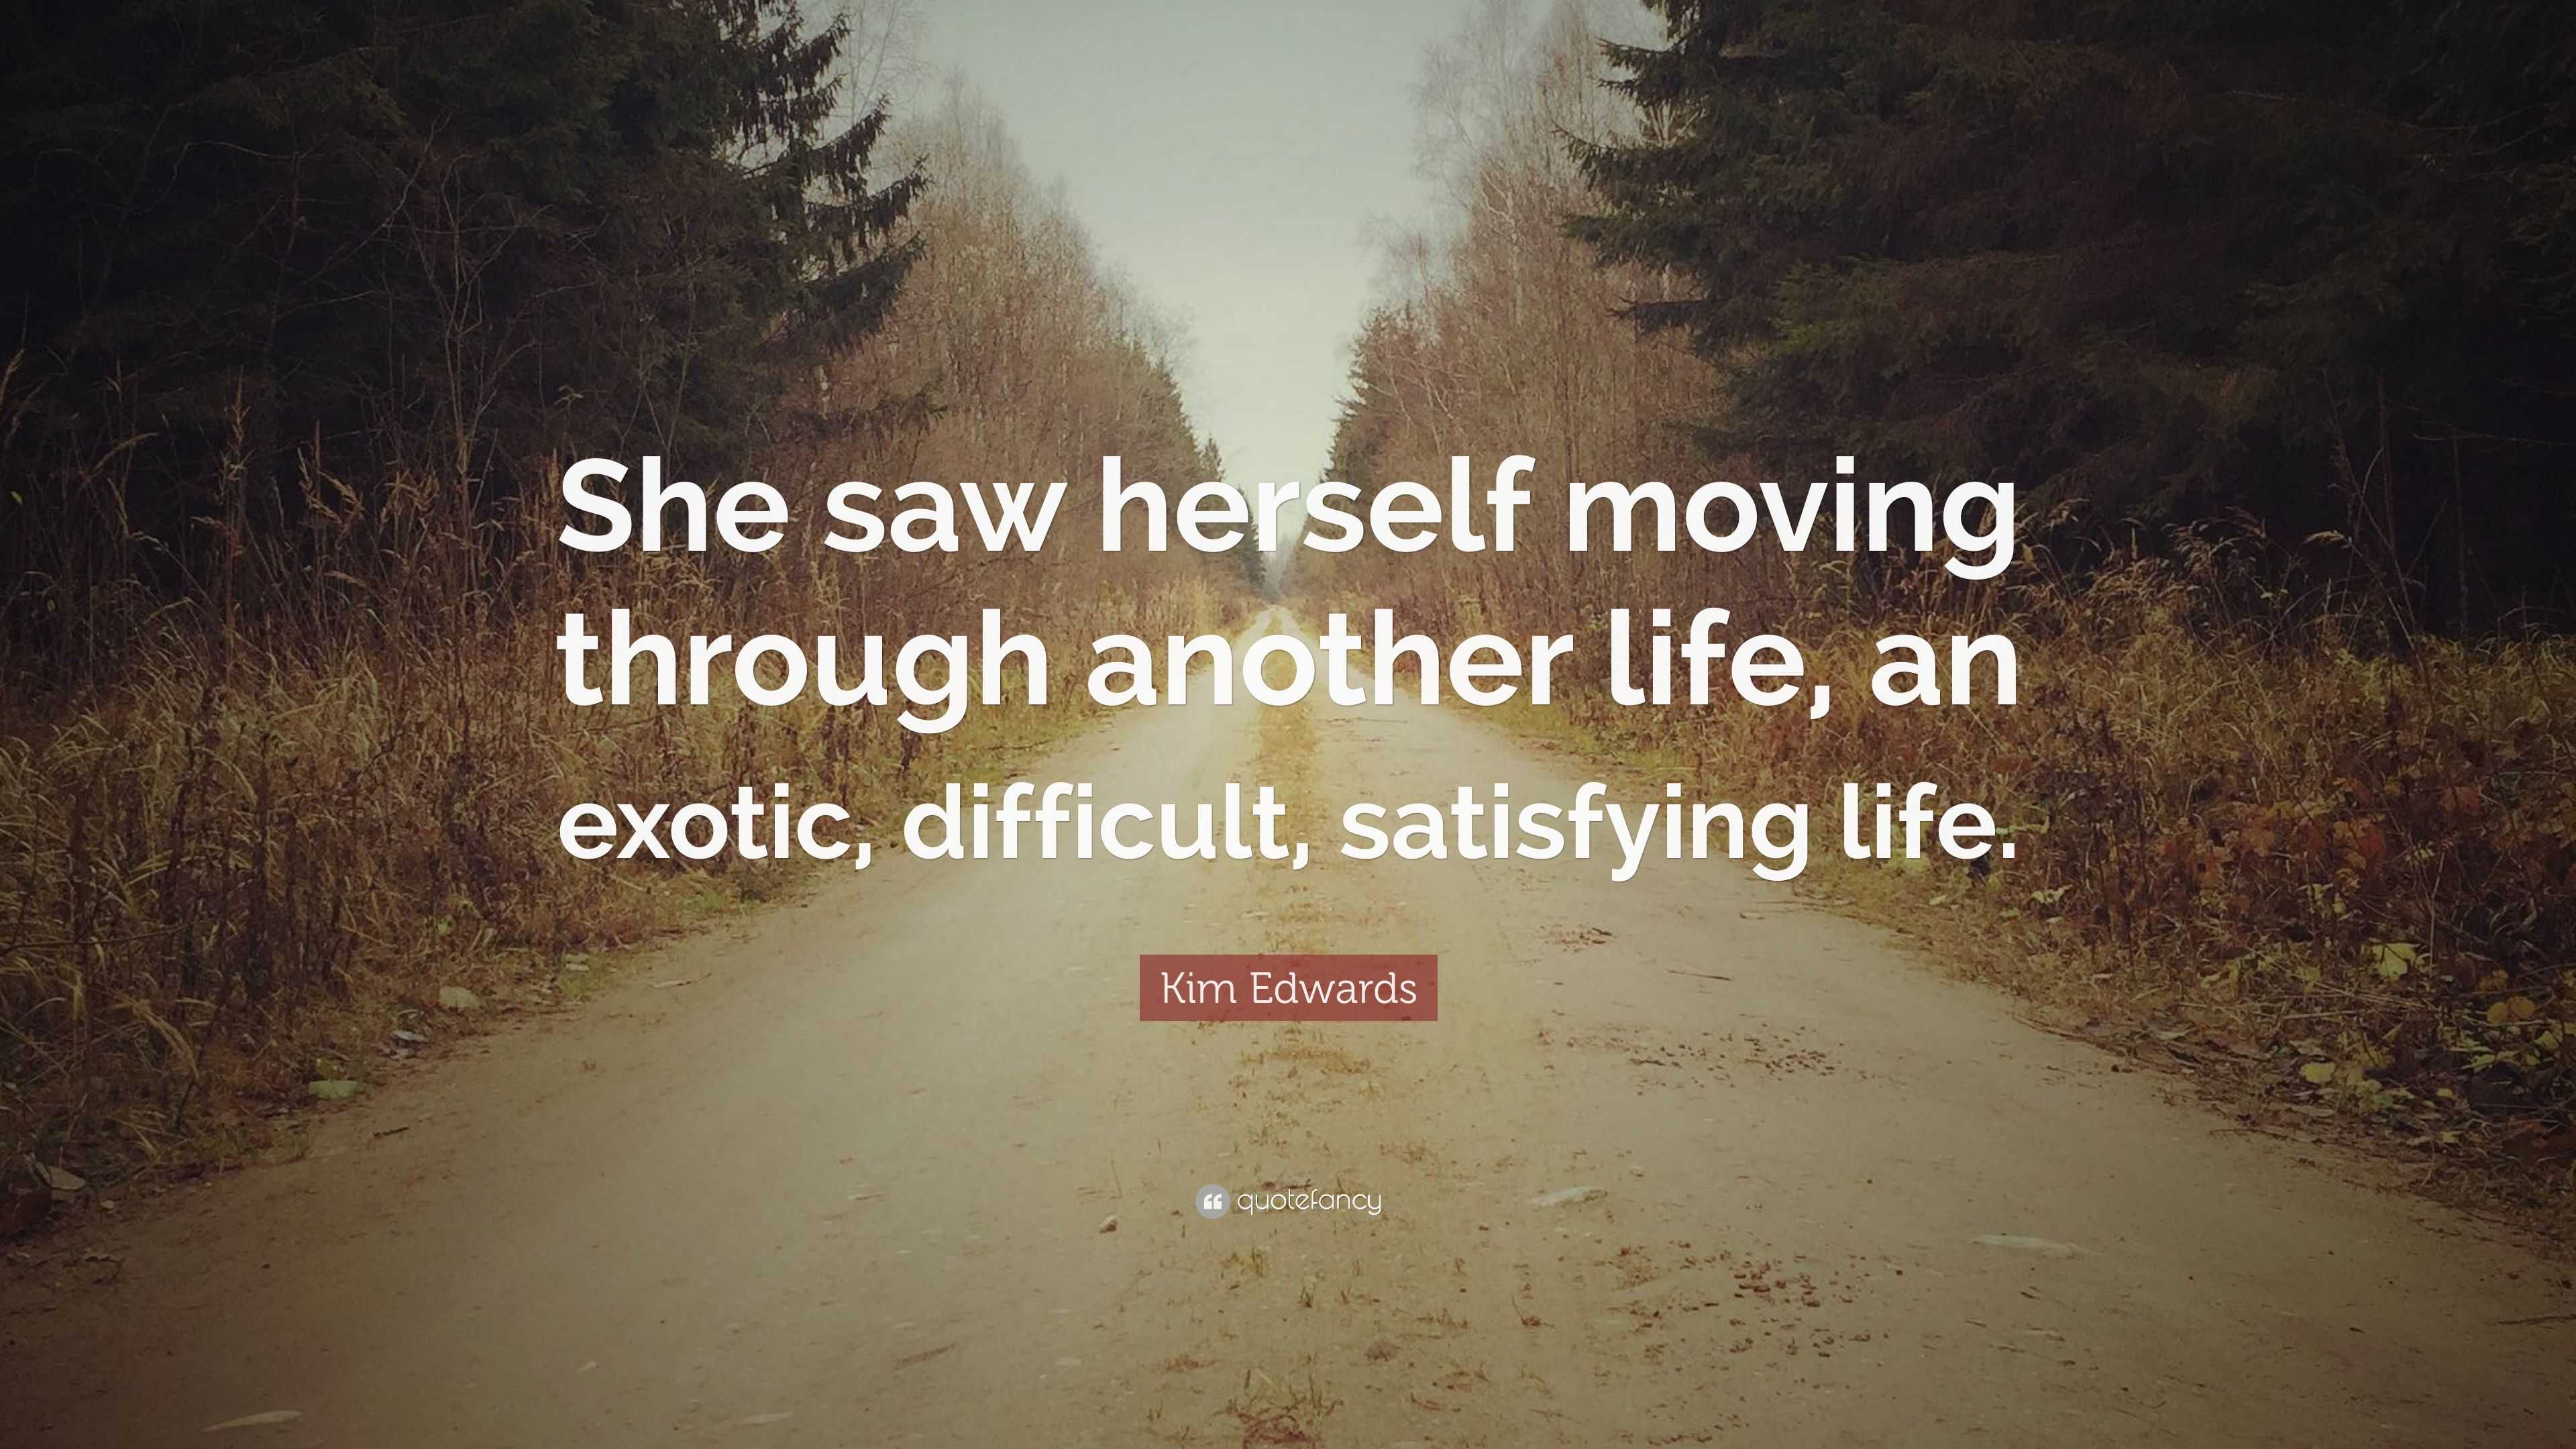 Kim Edwards Quote: “She saw herself moving through another life, an ...